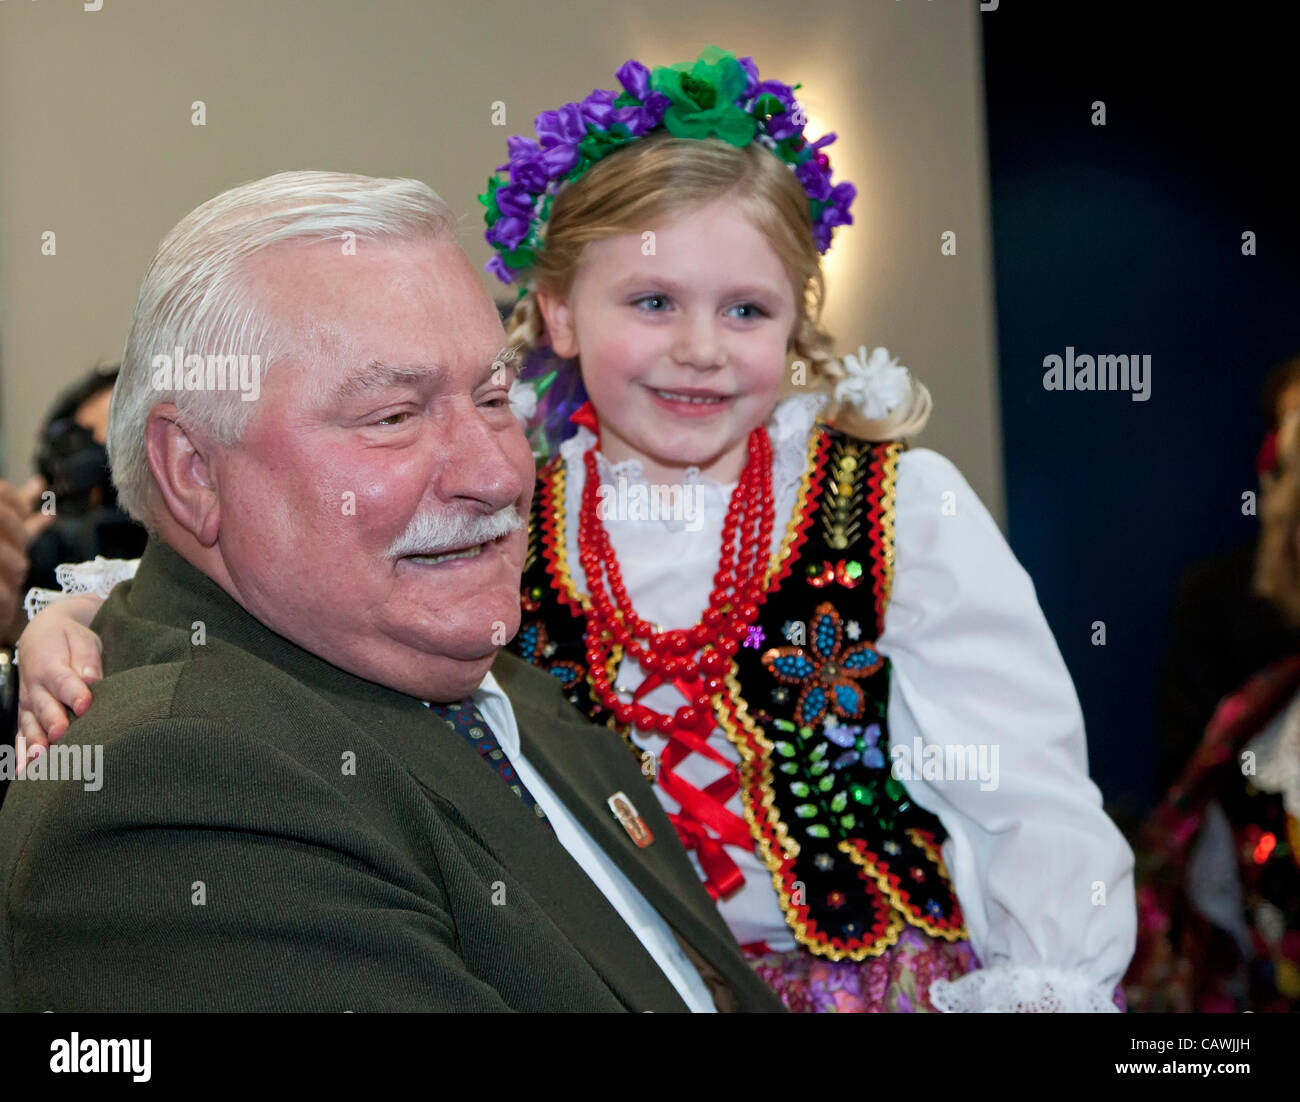 Detroit, Michigan - Lech Walesa holds Meredith Bayus, 5, of the Zamek Dance Troupe, as Walesa visits Chrysler's Jefferson North Assembly Plant. Walesa was a founder of the Solidarity trade union movement in Poland in 1980 and was elected president of Poland in 1990. He was awarded t Stock Photo